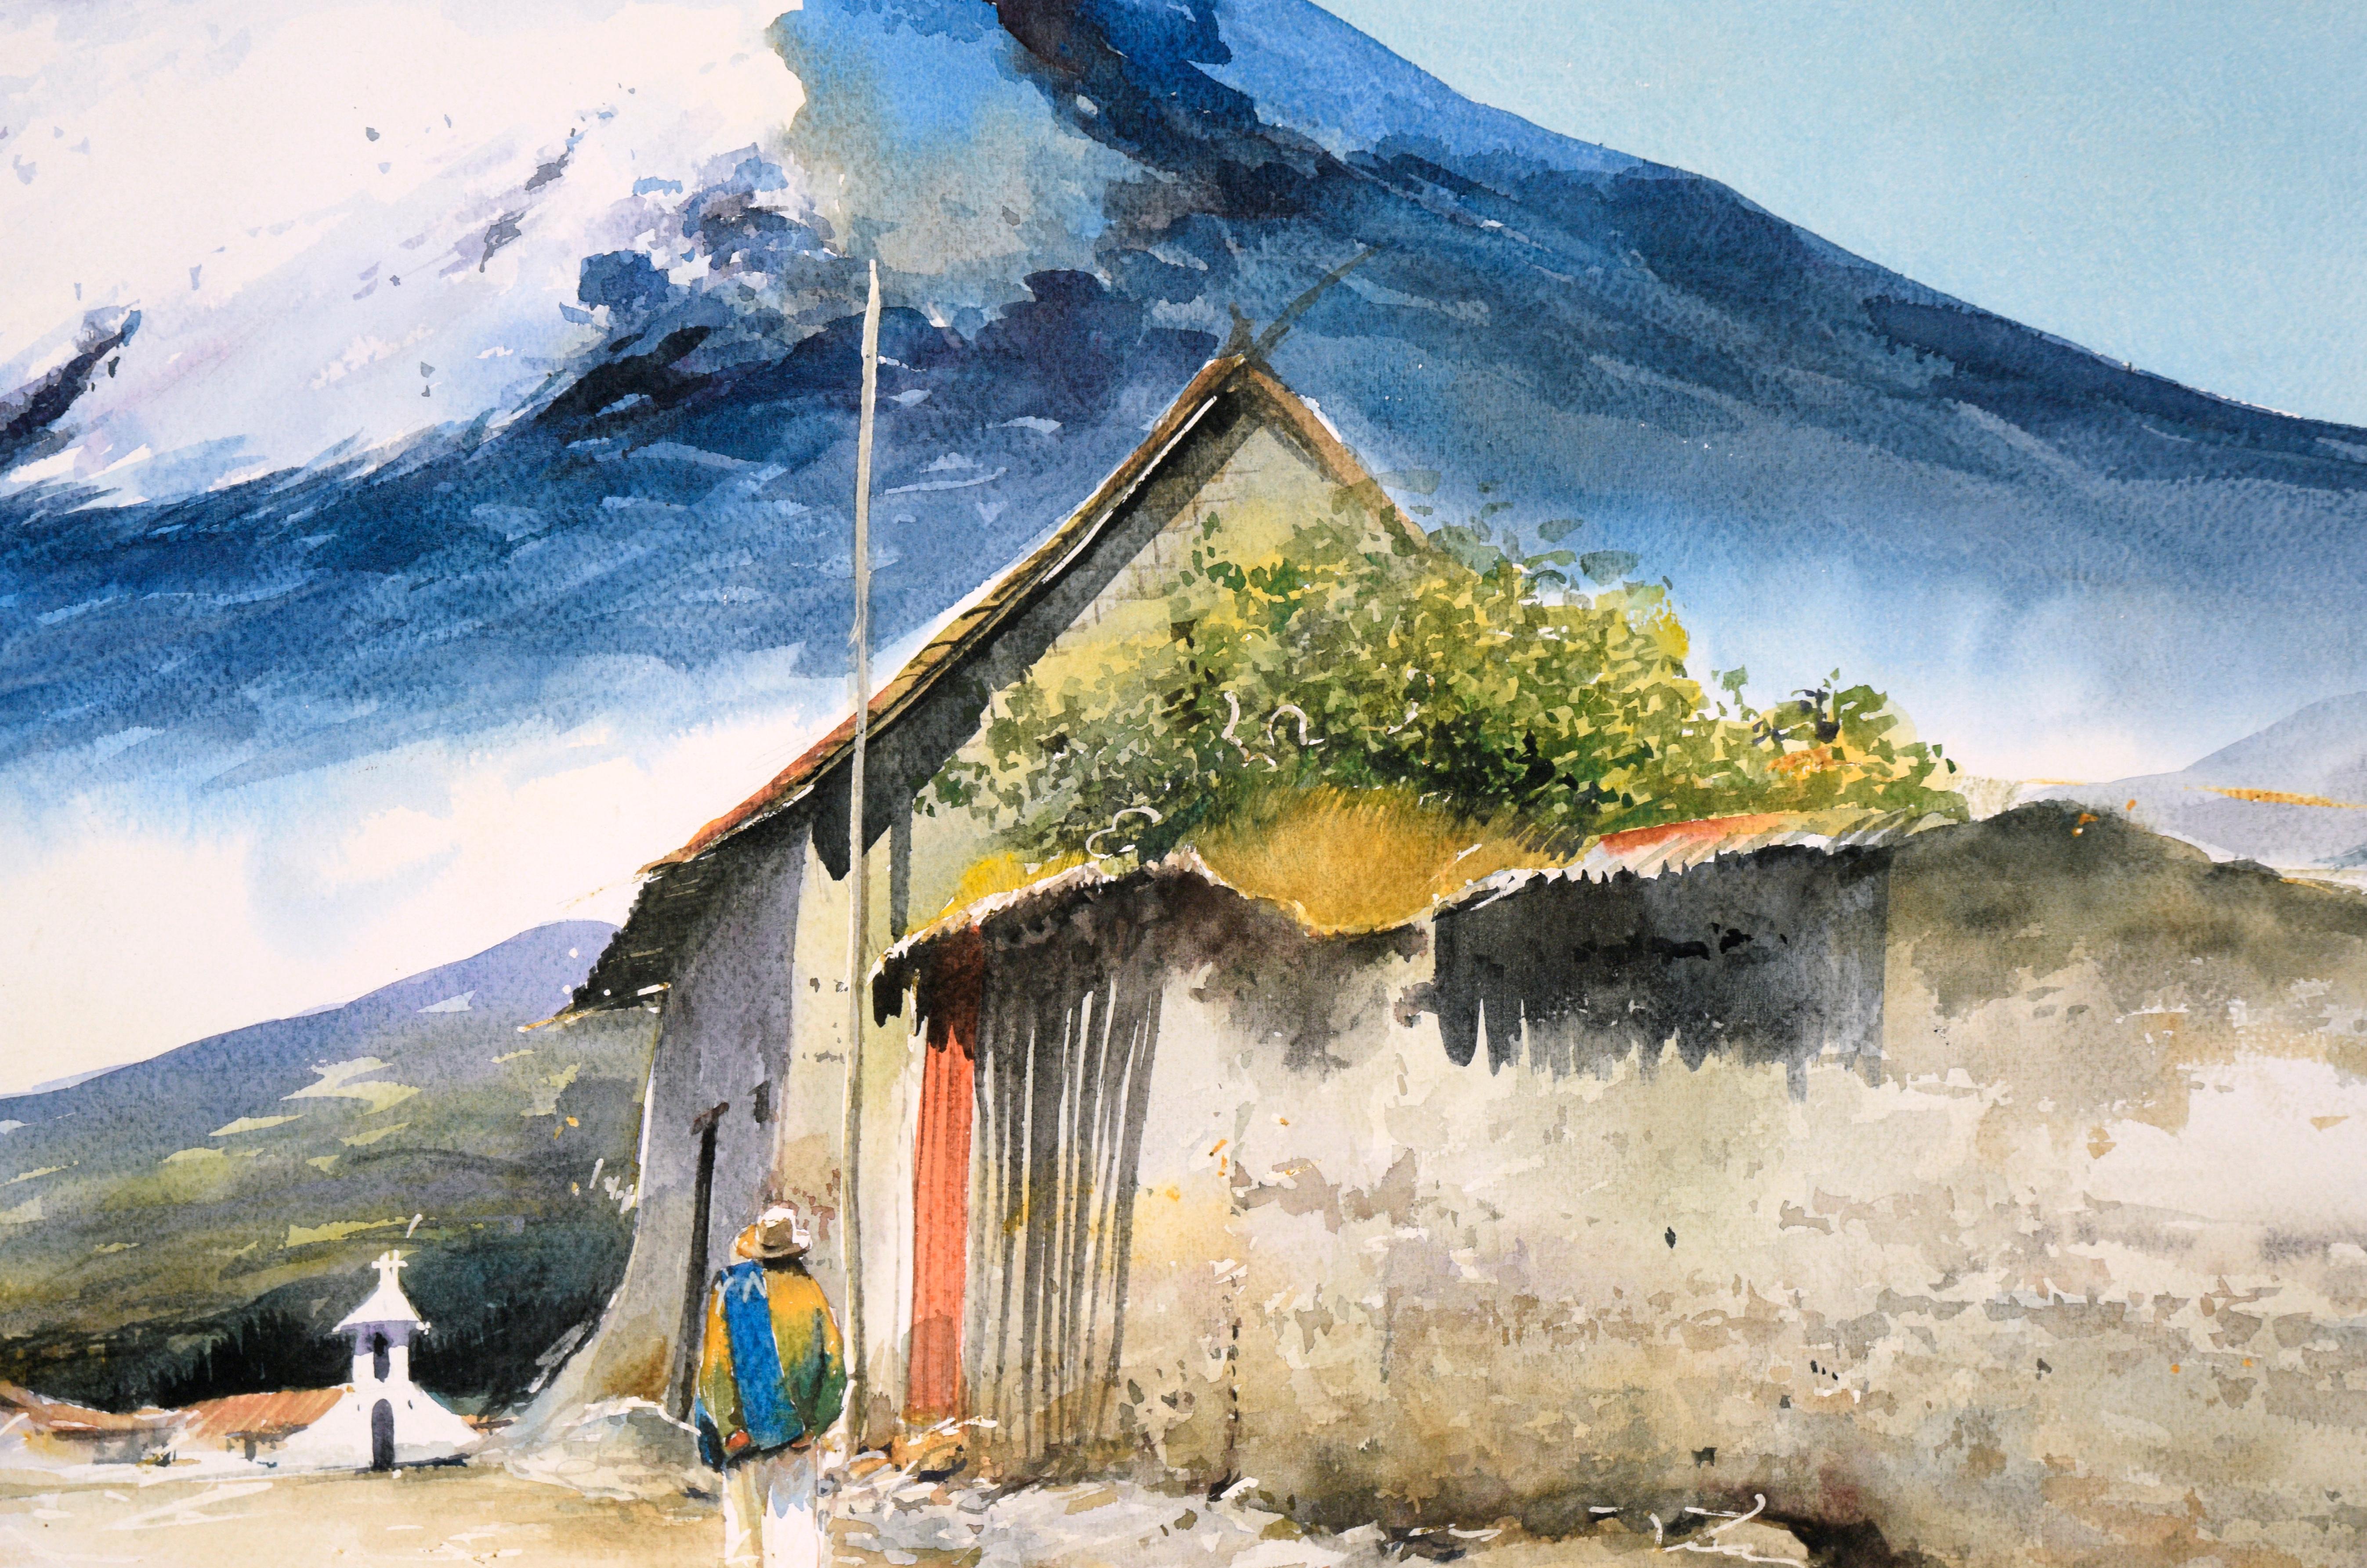 Village at the Base of the Andes Mountains - Watercolor Landscape on Paper - Beige Landscape Painting by Erazo